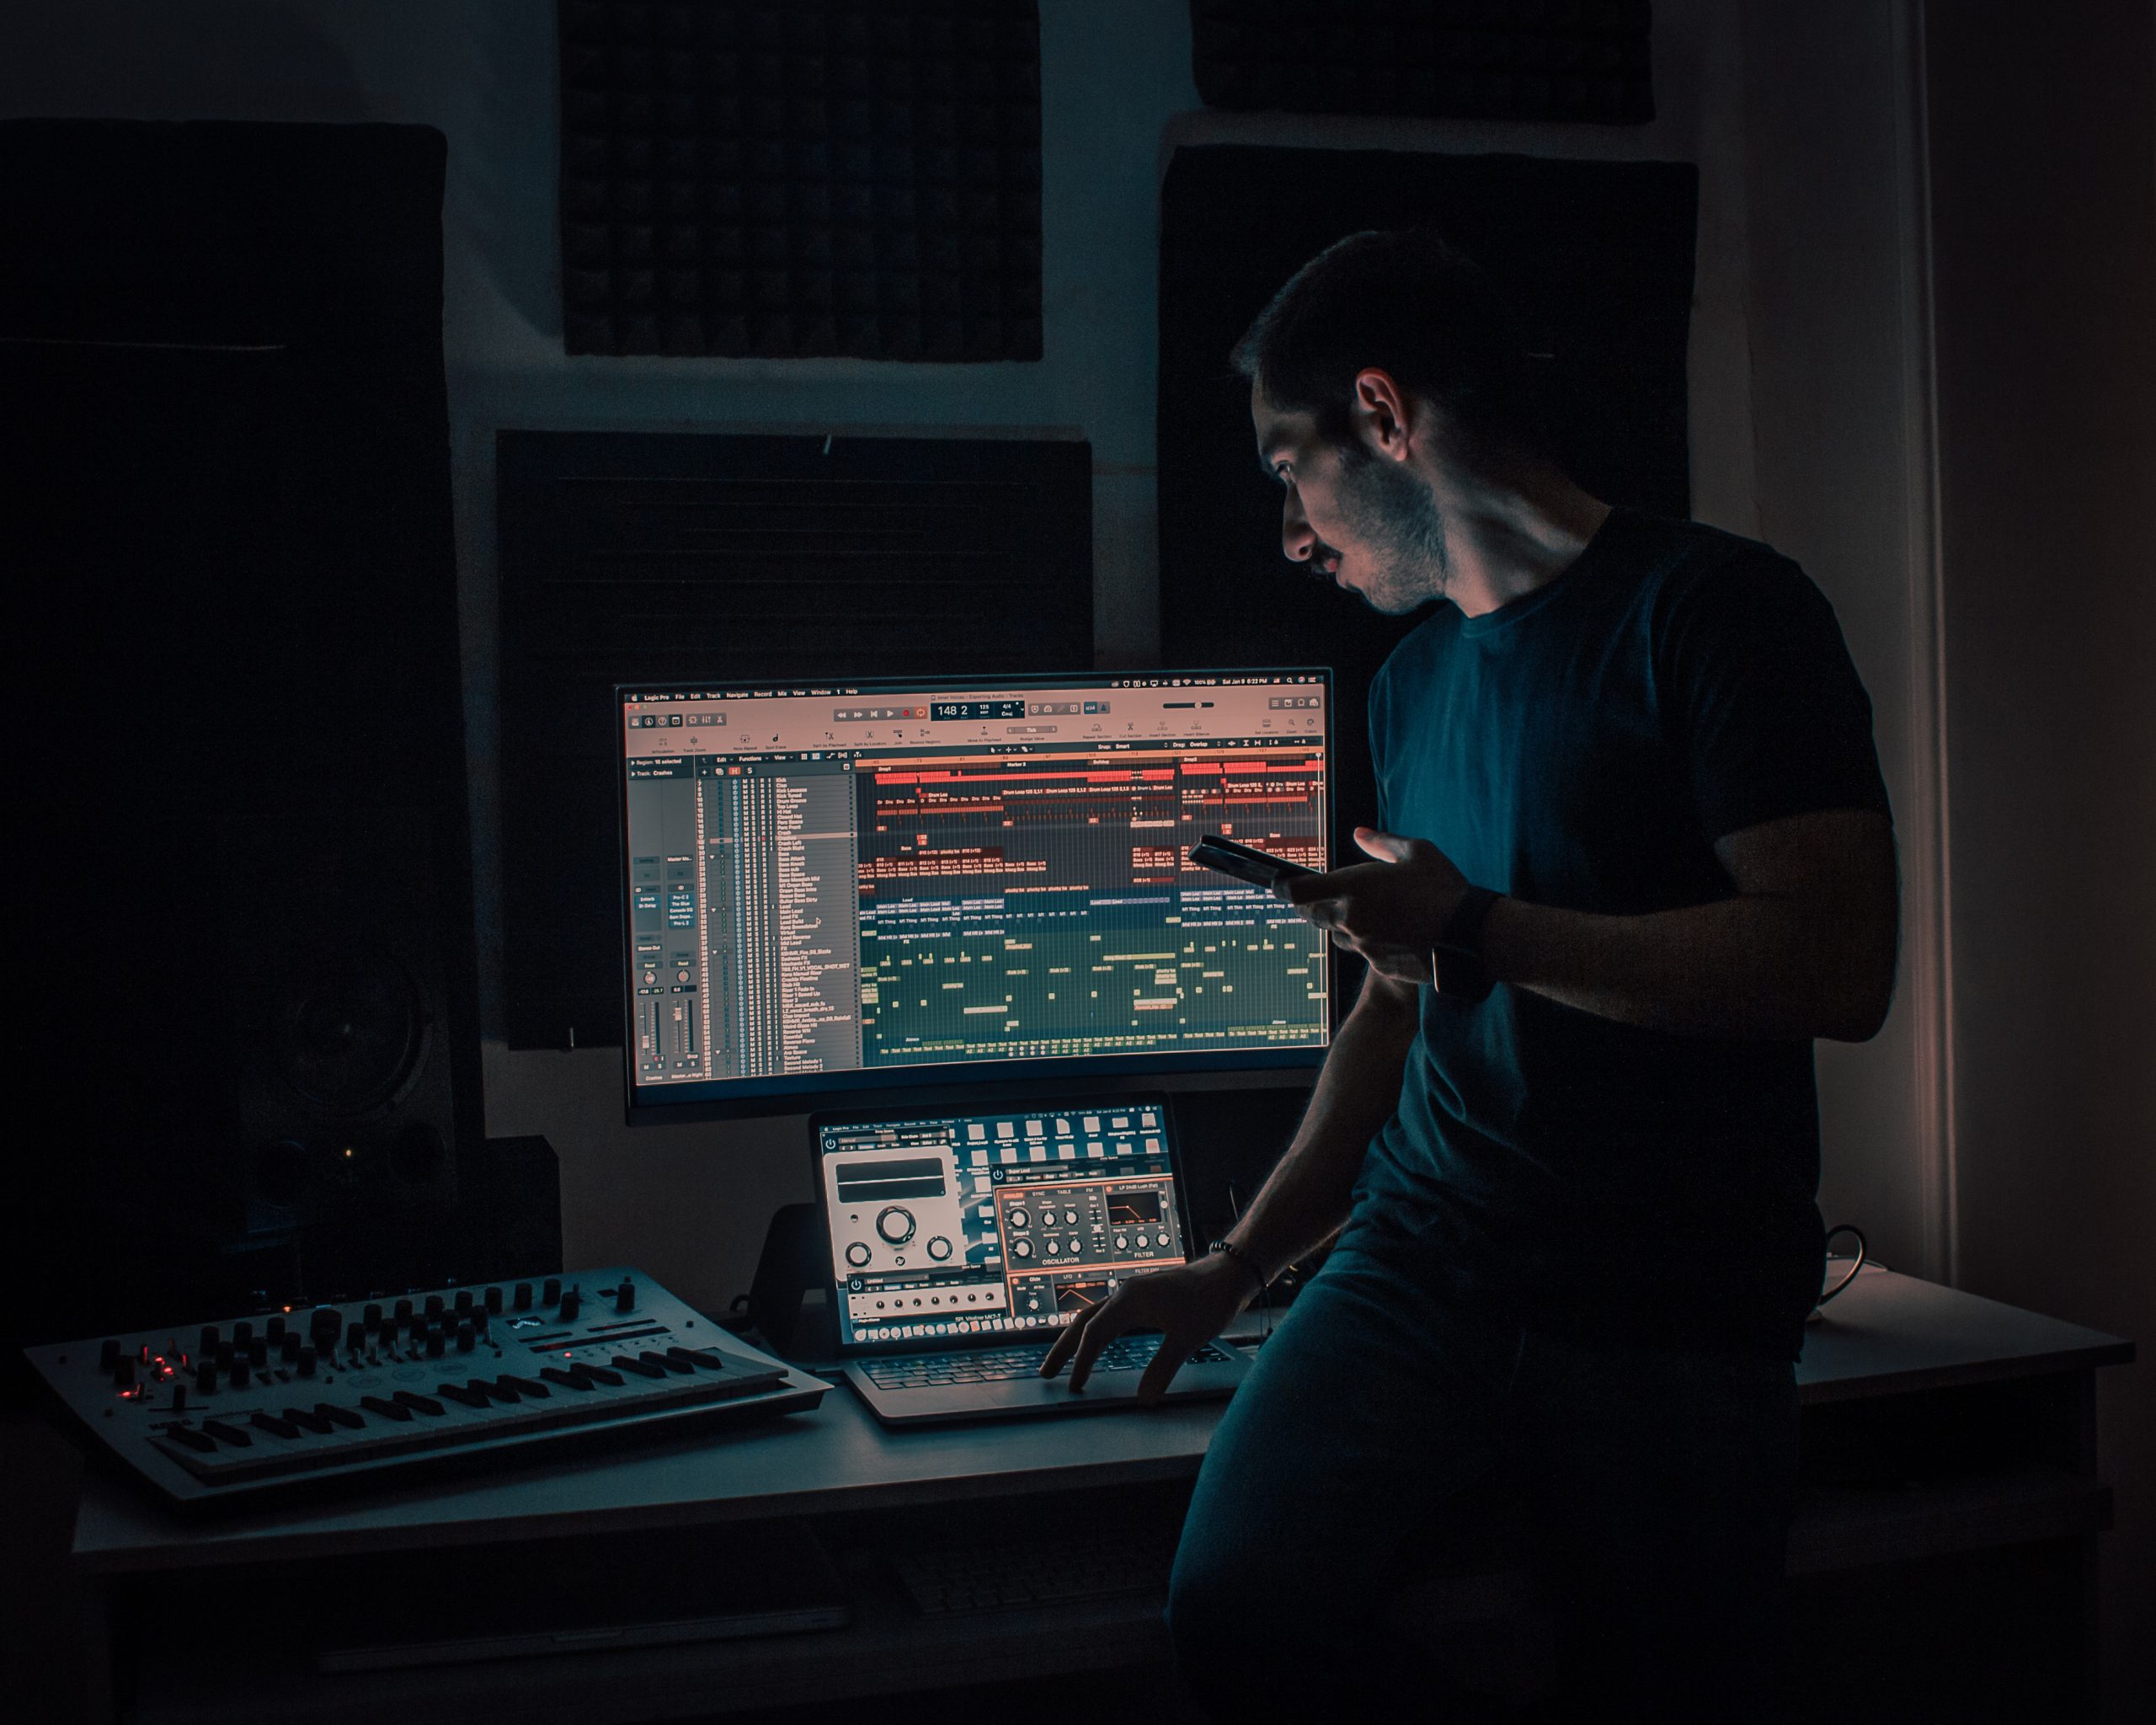 Working with dual monitors for music production